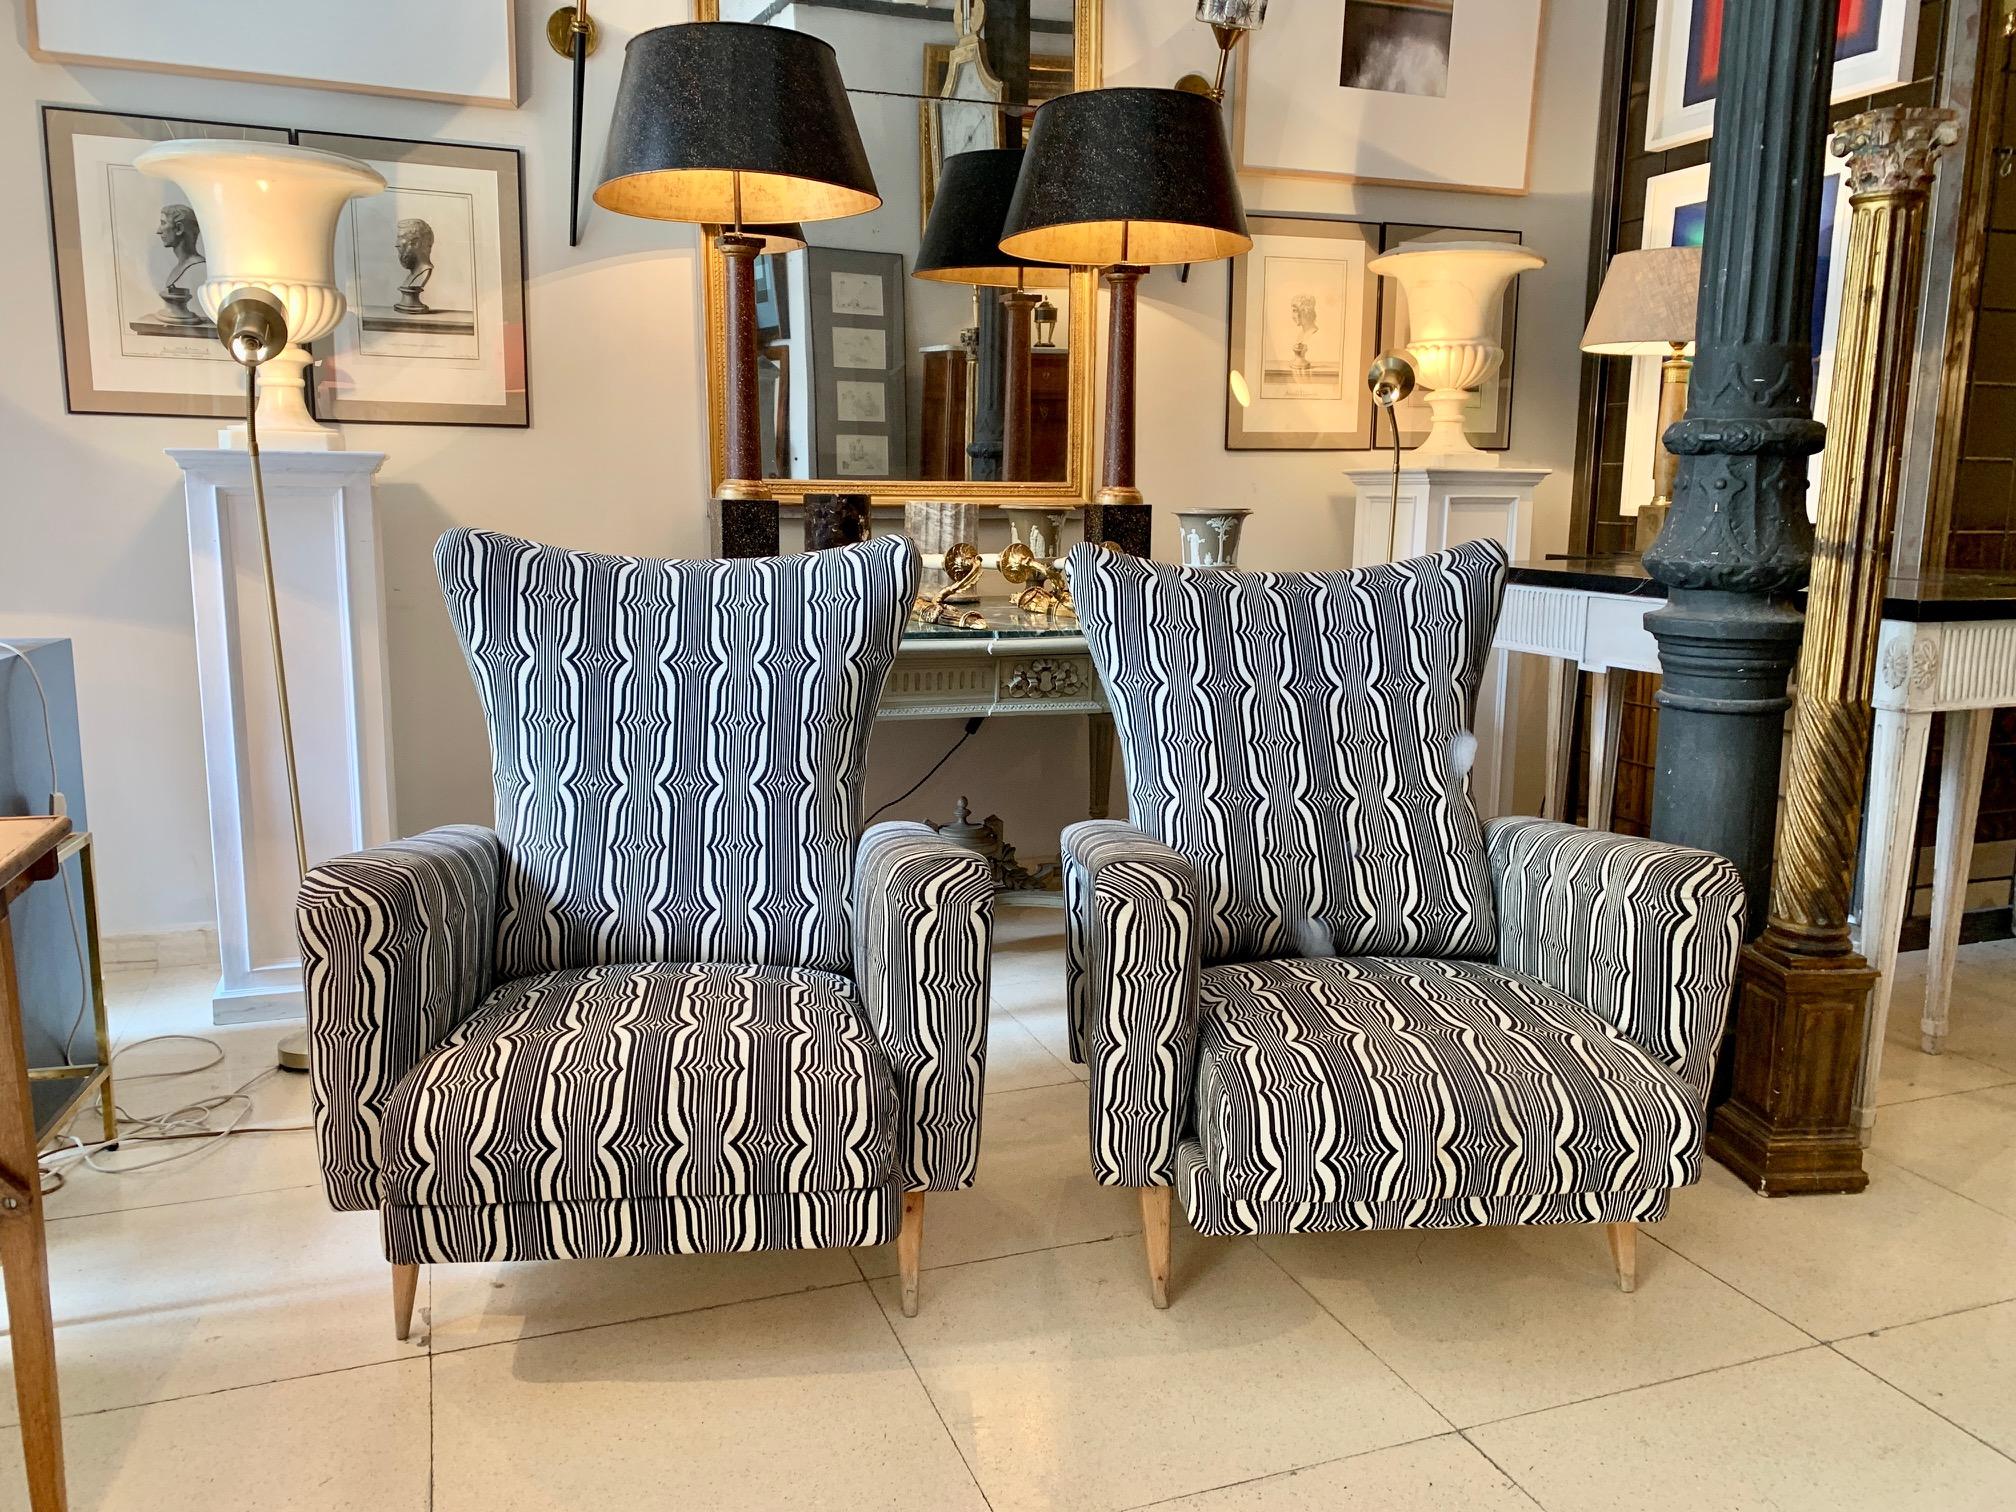 Pair of reclining Italian armchairs, in the style of Gio Ponti, circa 1950. The structure is metallic and its legs are in beech wood, its reclining position only requires pressure to extend, reupholstered five years ago.